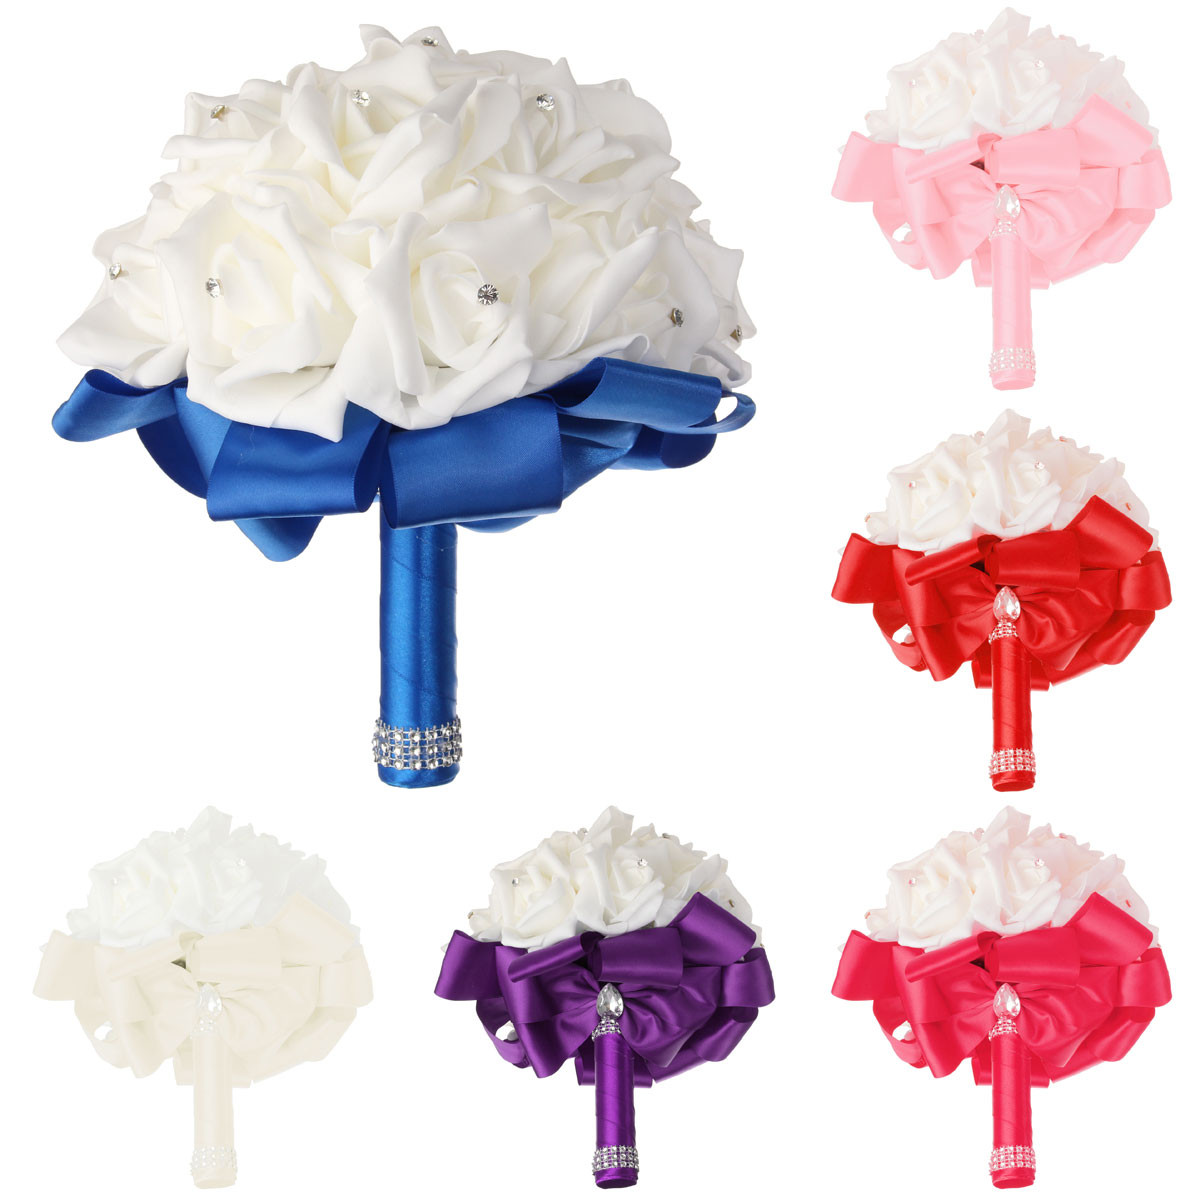 22-Heads-Colourfast-Foam-Roses-Crystal-Artificial-Flower-Home-Wedding-Bride-Bouquet-Party-Decoration-1025320